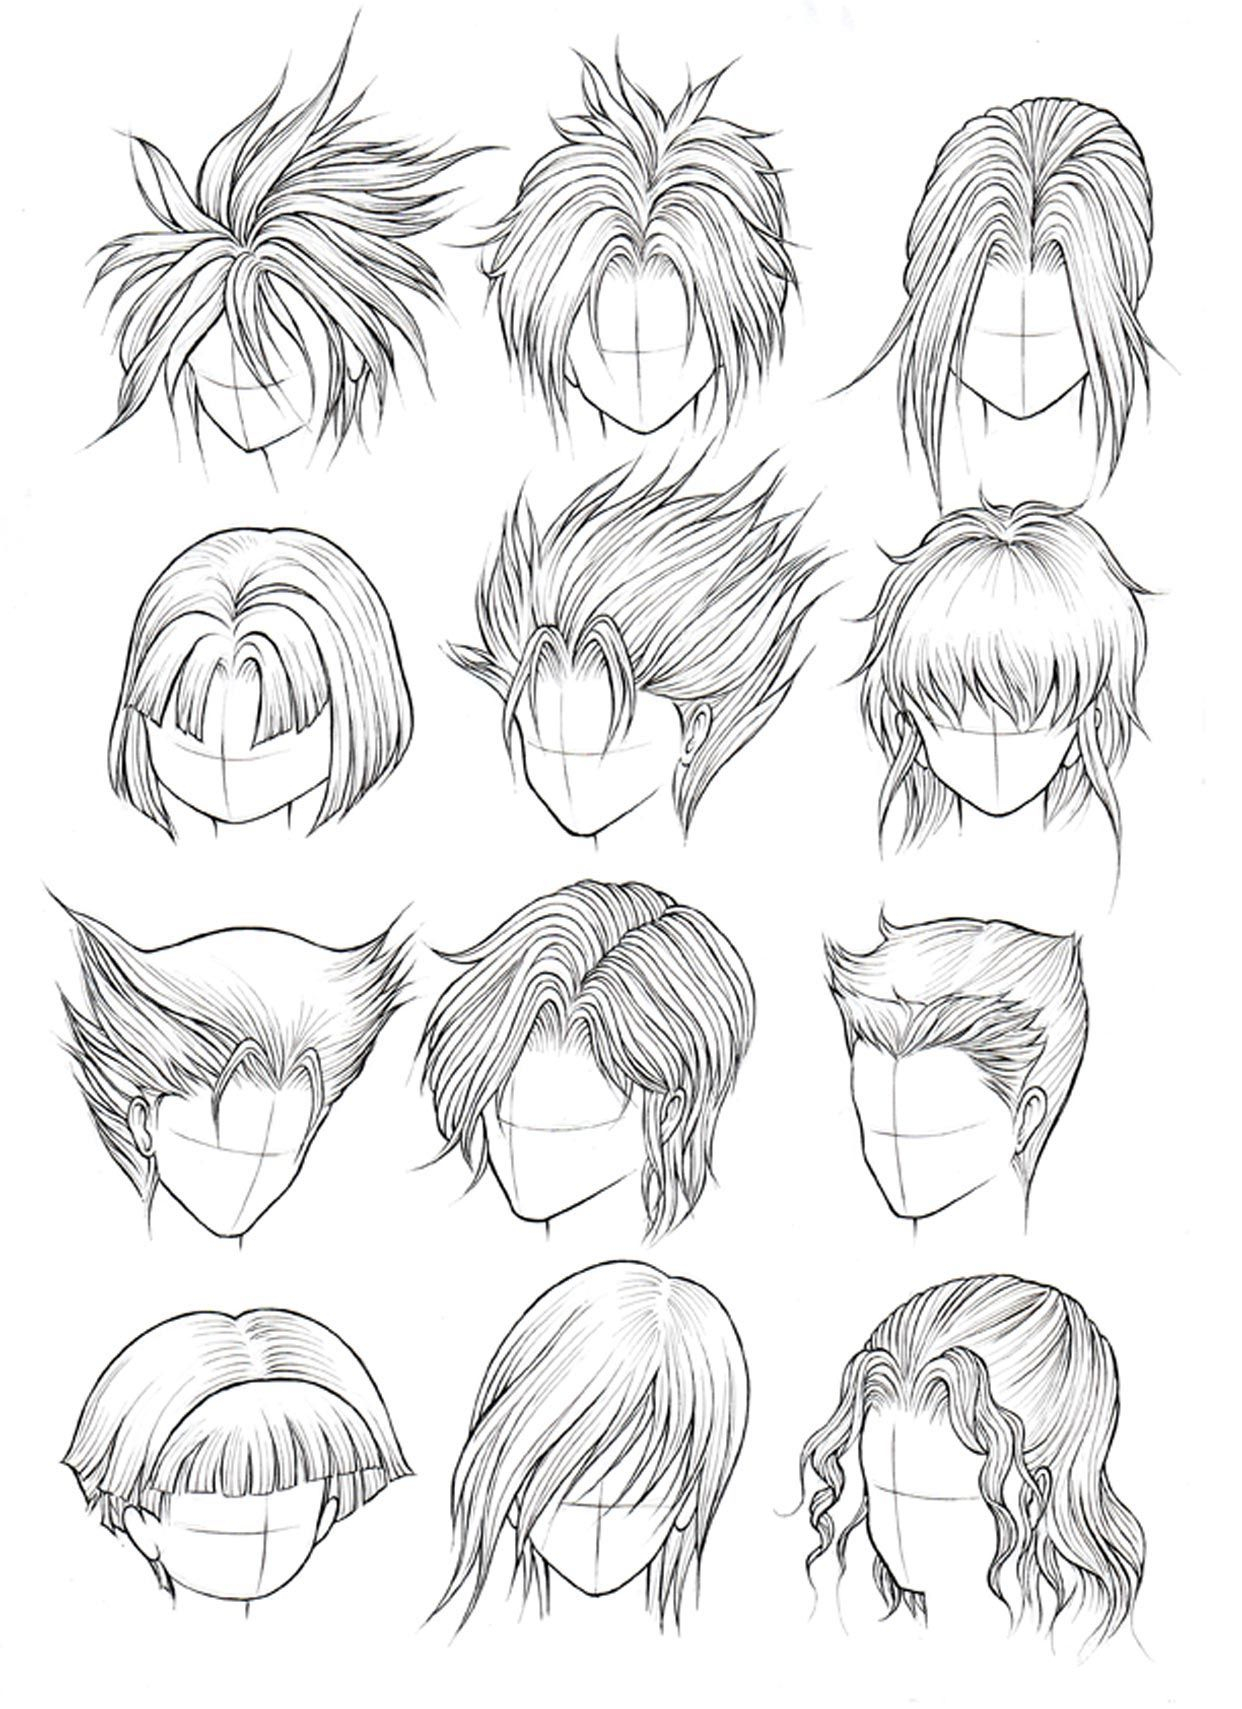 How To Draw Anime Long Hair Boy / Step five includes the hair, eyes